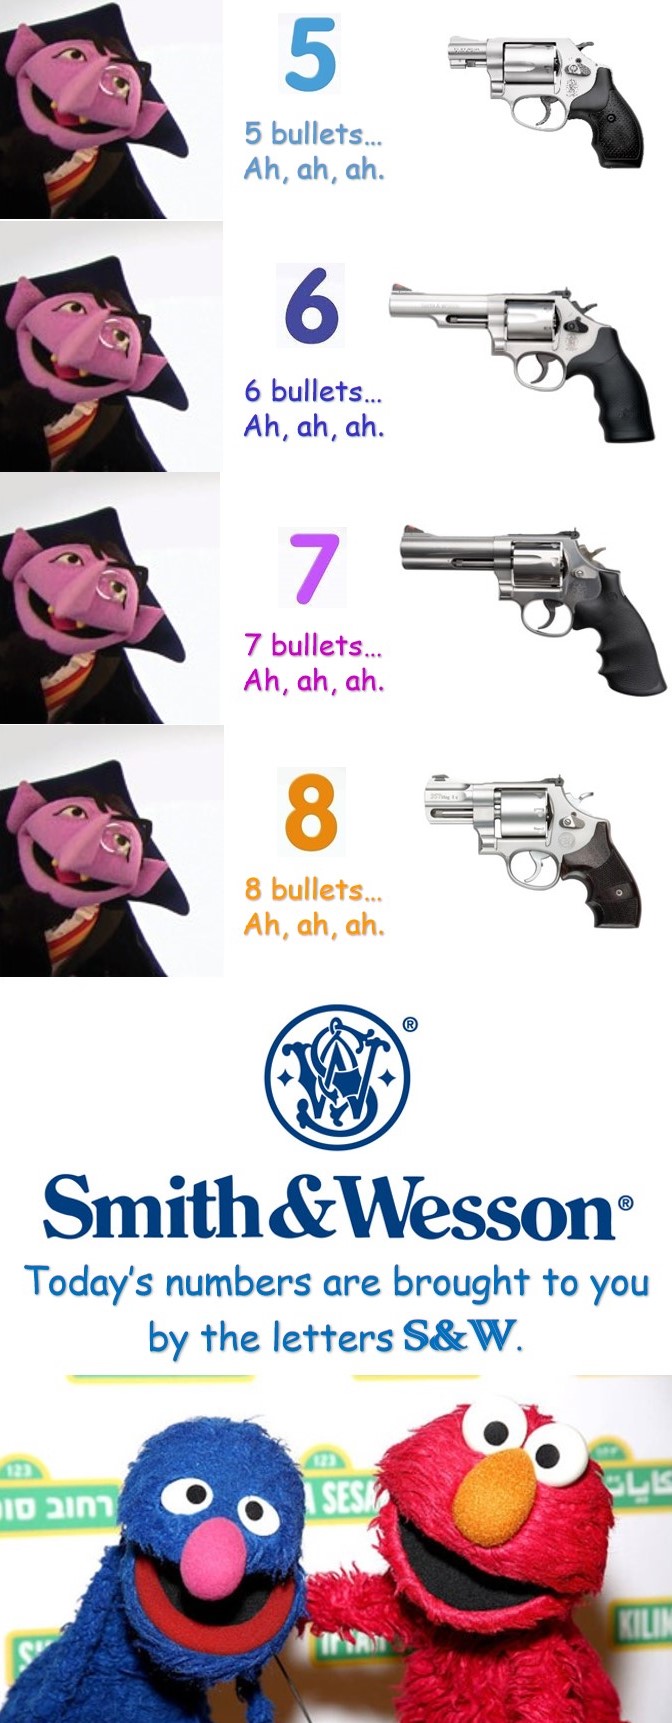 Counting Bullets.jpg